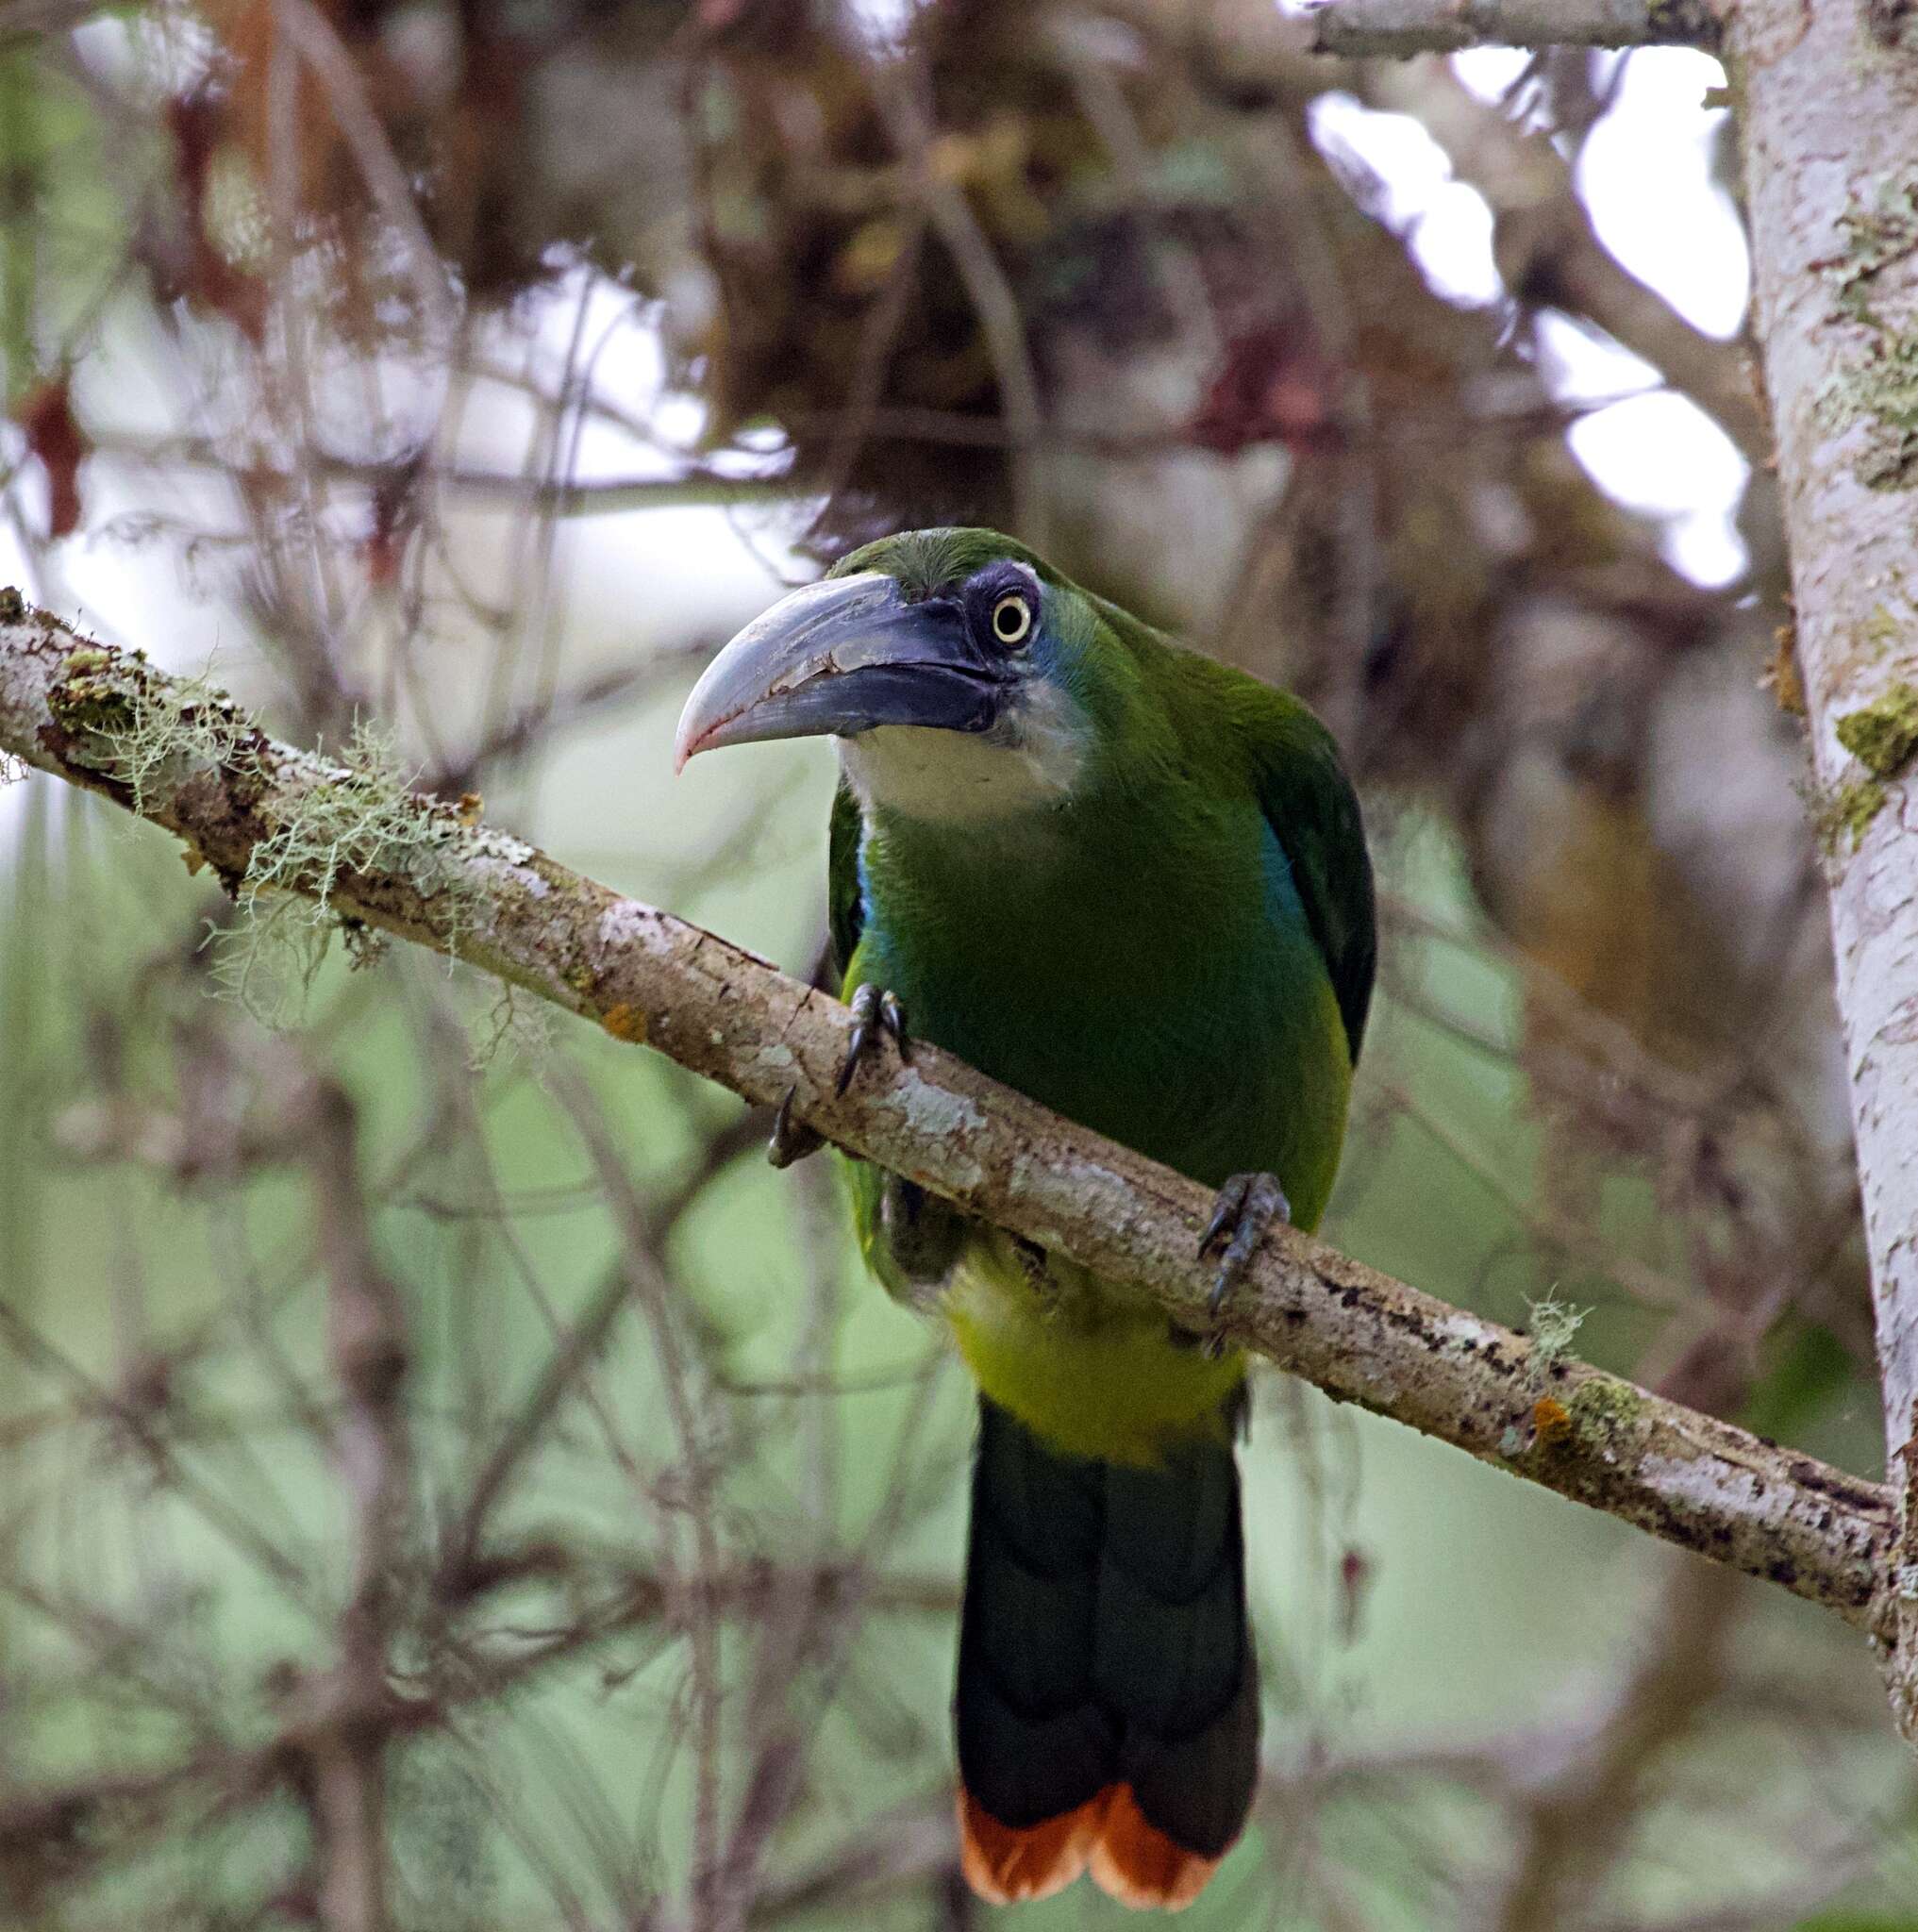 Image of Blue-banded Toucanet